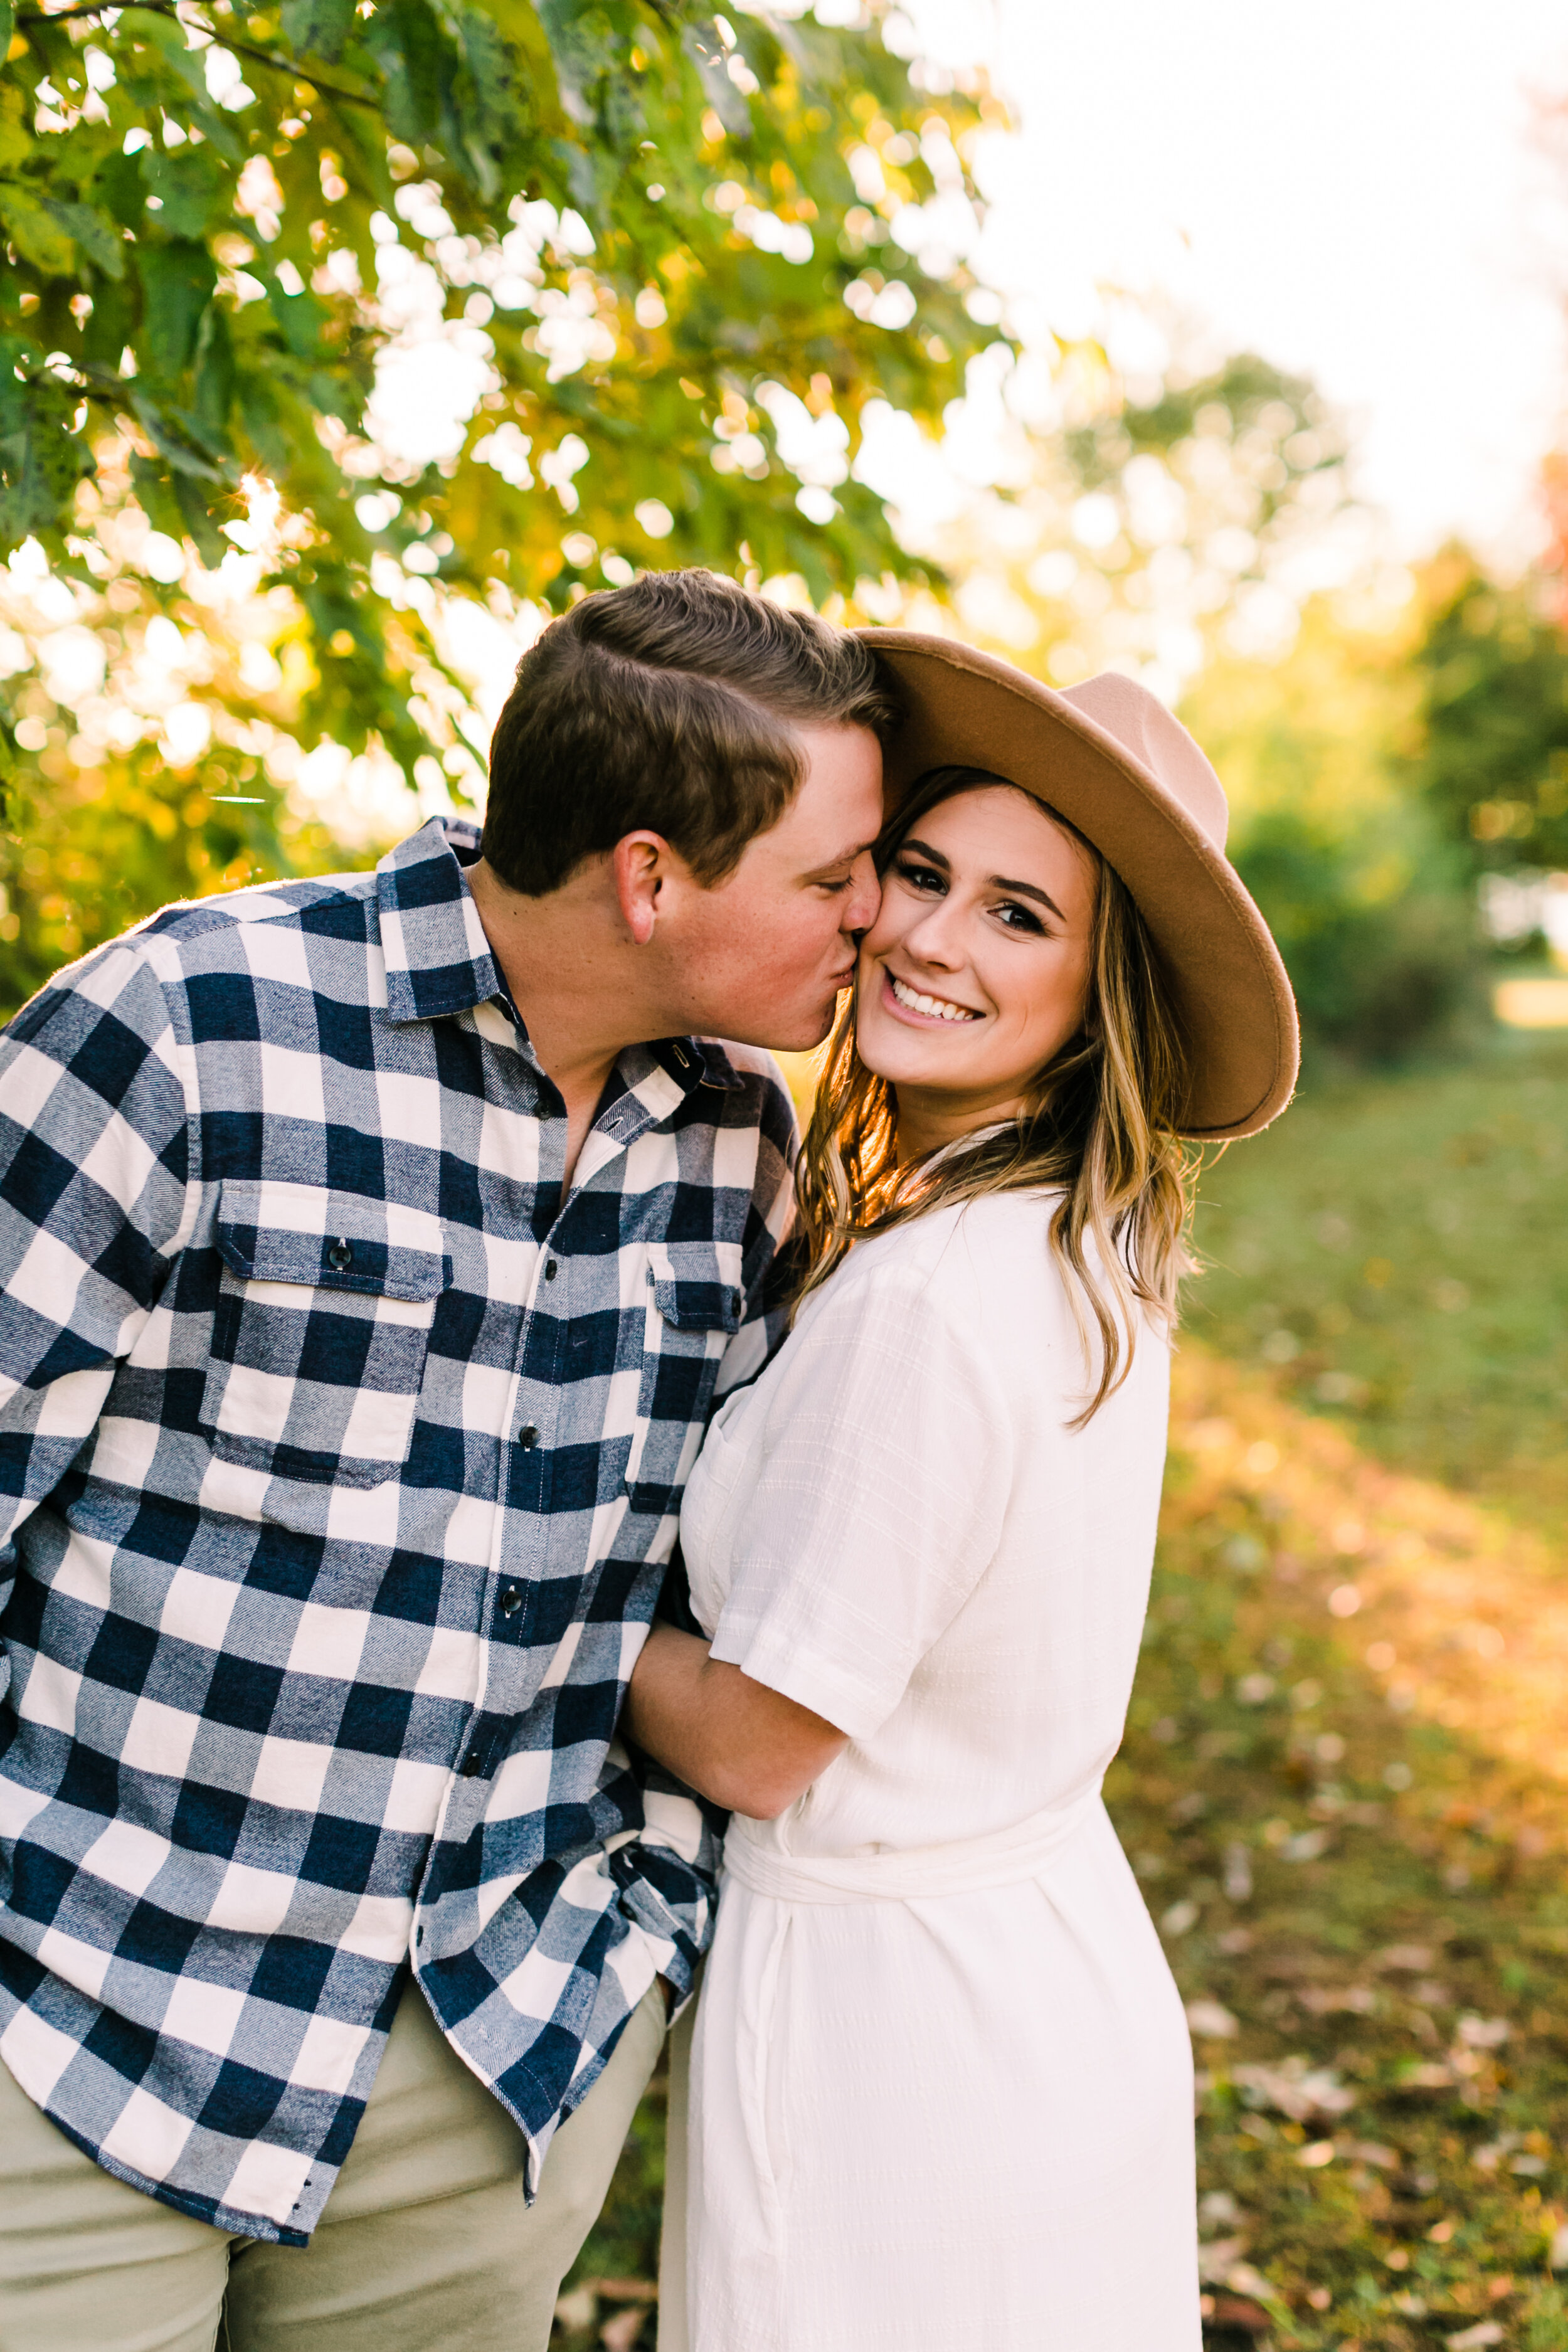 Tennessee+Fall+Engagement+Photos+Puppy (48 of 63).jpg